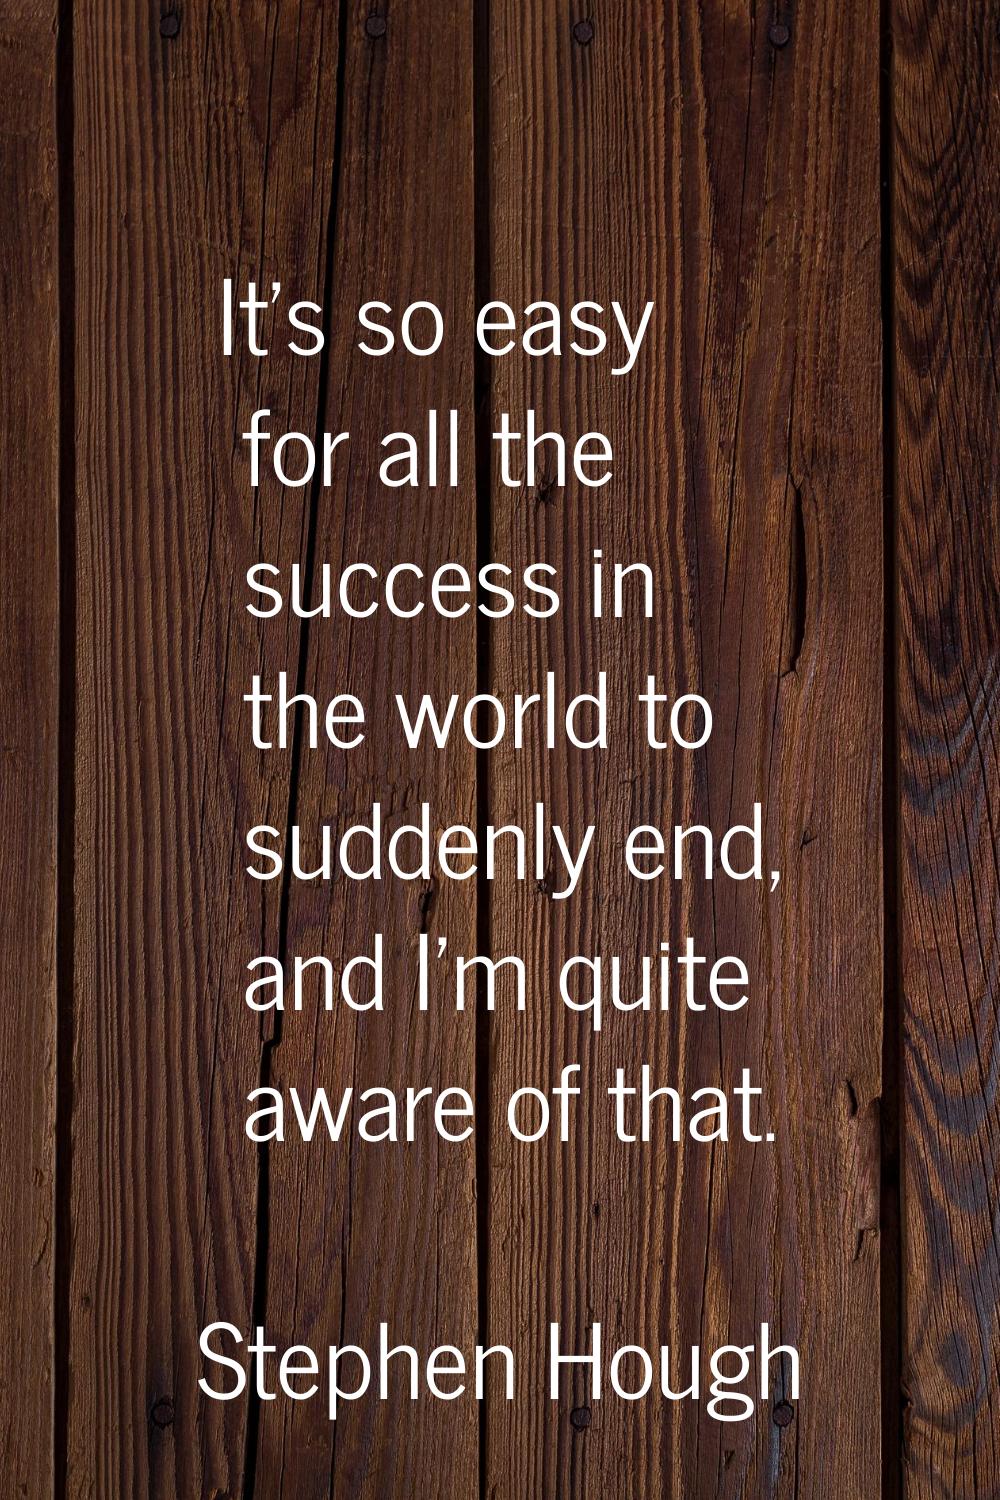 It's so easy for all the success in the world to suddenly end, and I'm quite aware of that.